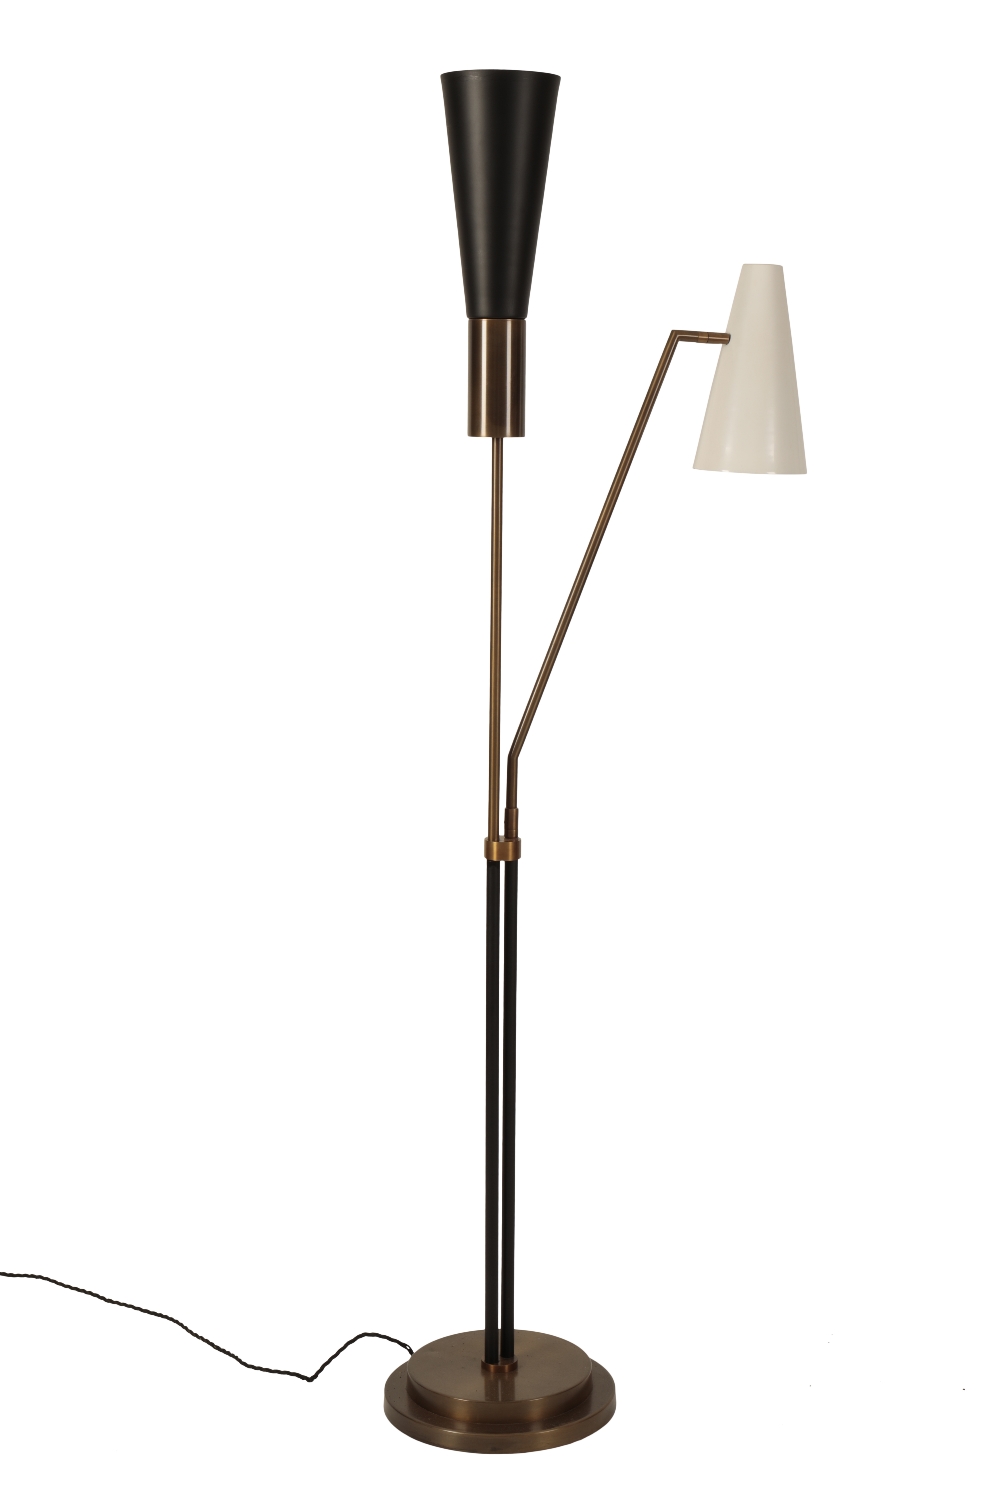 BESPOKE BRASS TWIN COLUMN FLOOR LAMP BY HEATHFIELD AND CO FOR THE DEVONSHIRE CLUB